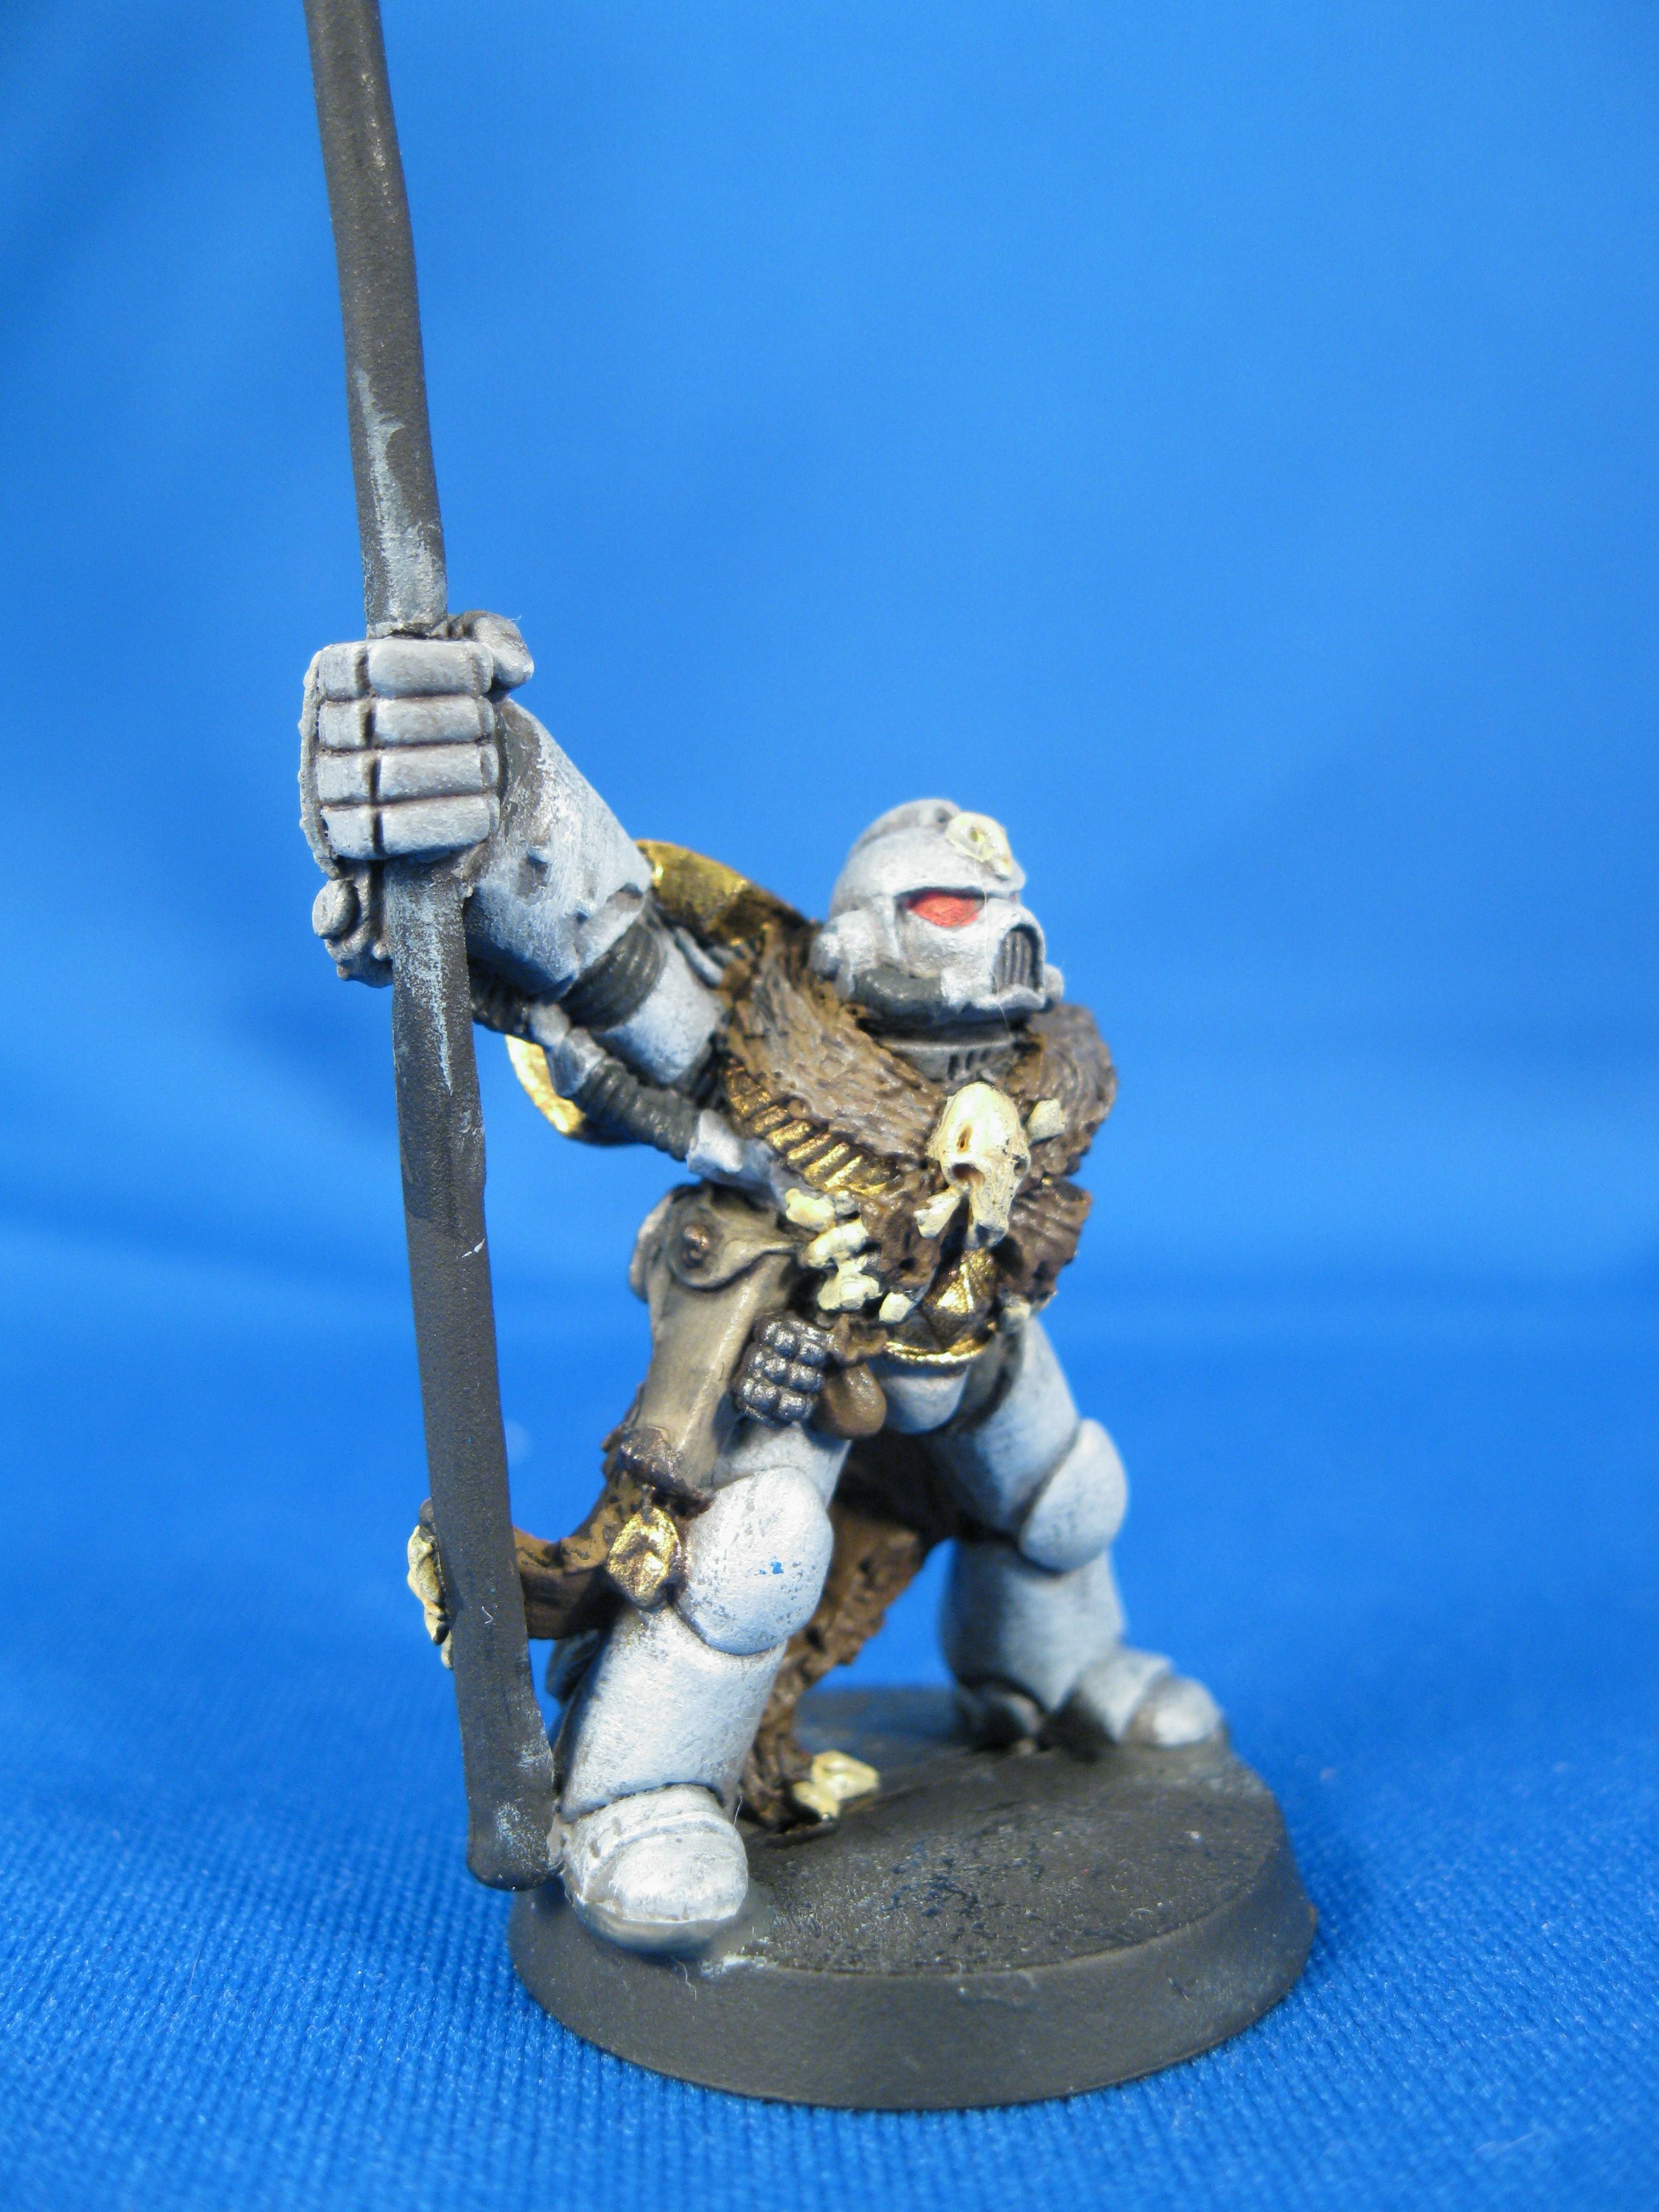 Commission, Space Marines, Space Wolves, Warhammer 40,000